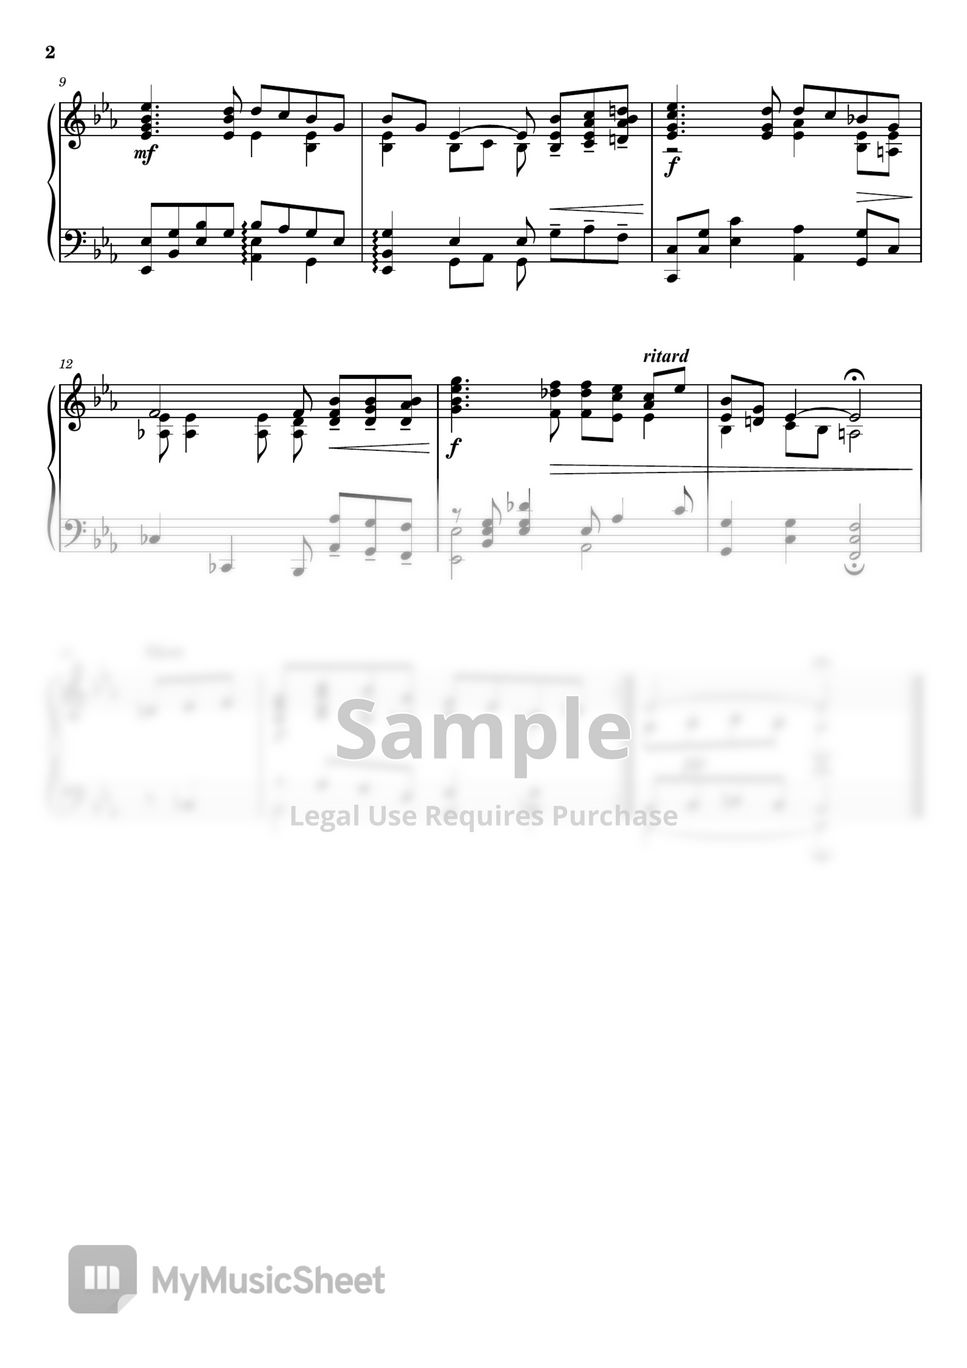 Misc Traditional - Londonderry Air (Folk - For Piano Solo) Sheets by poon